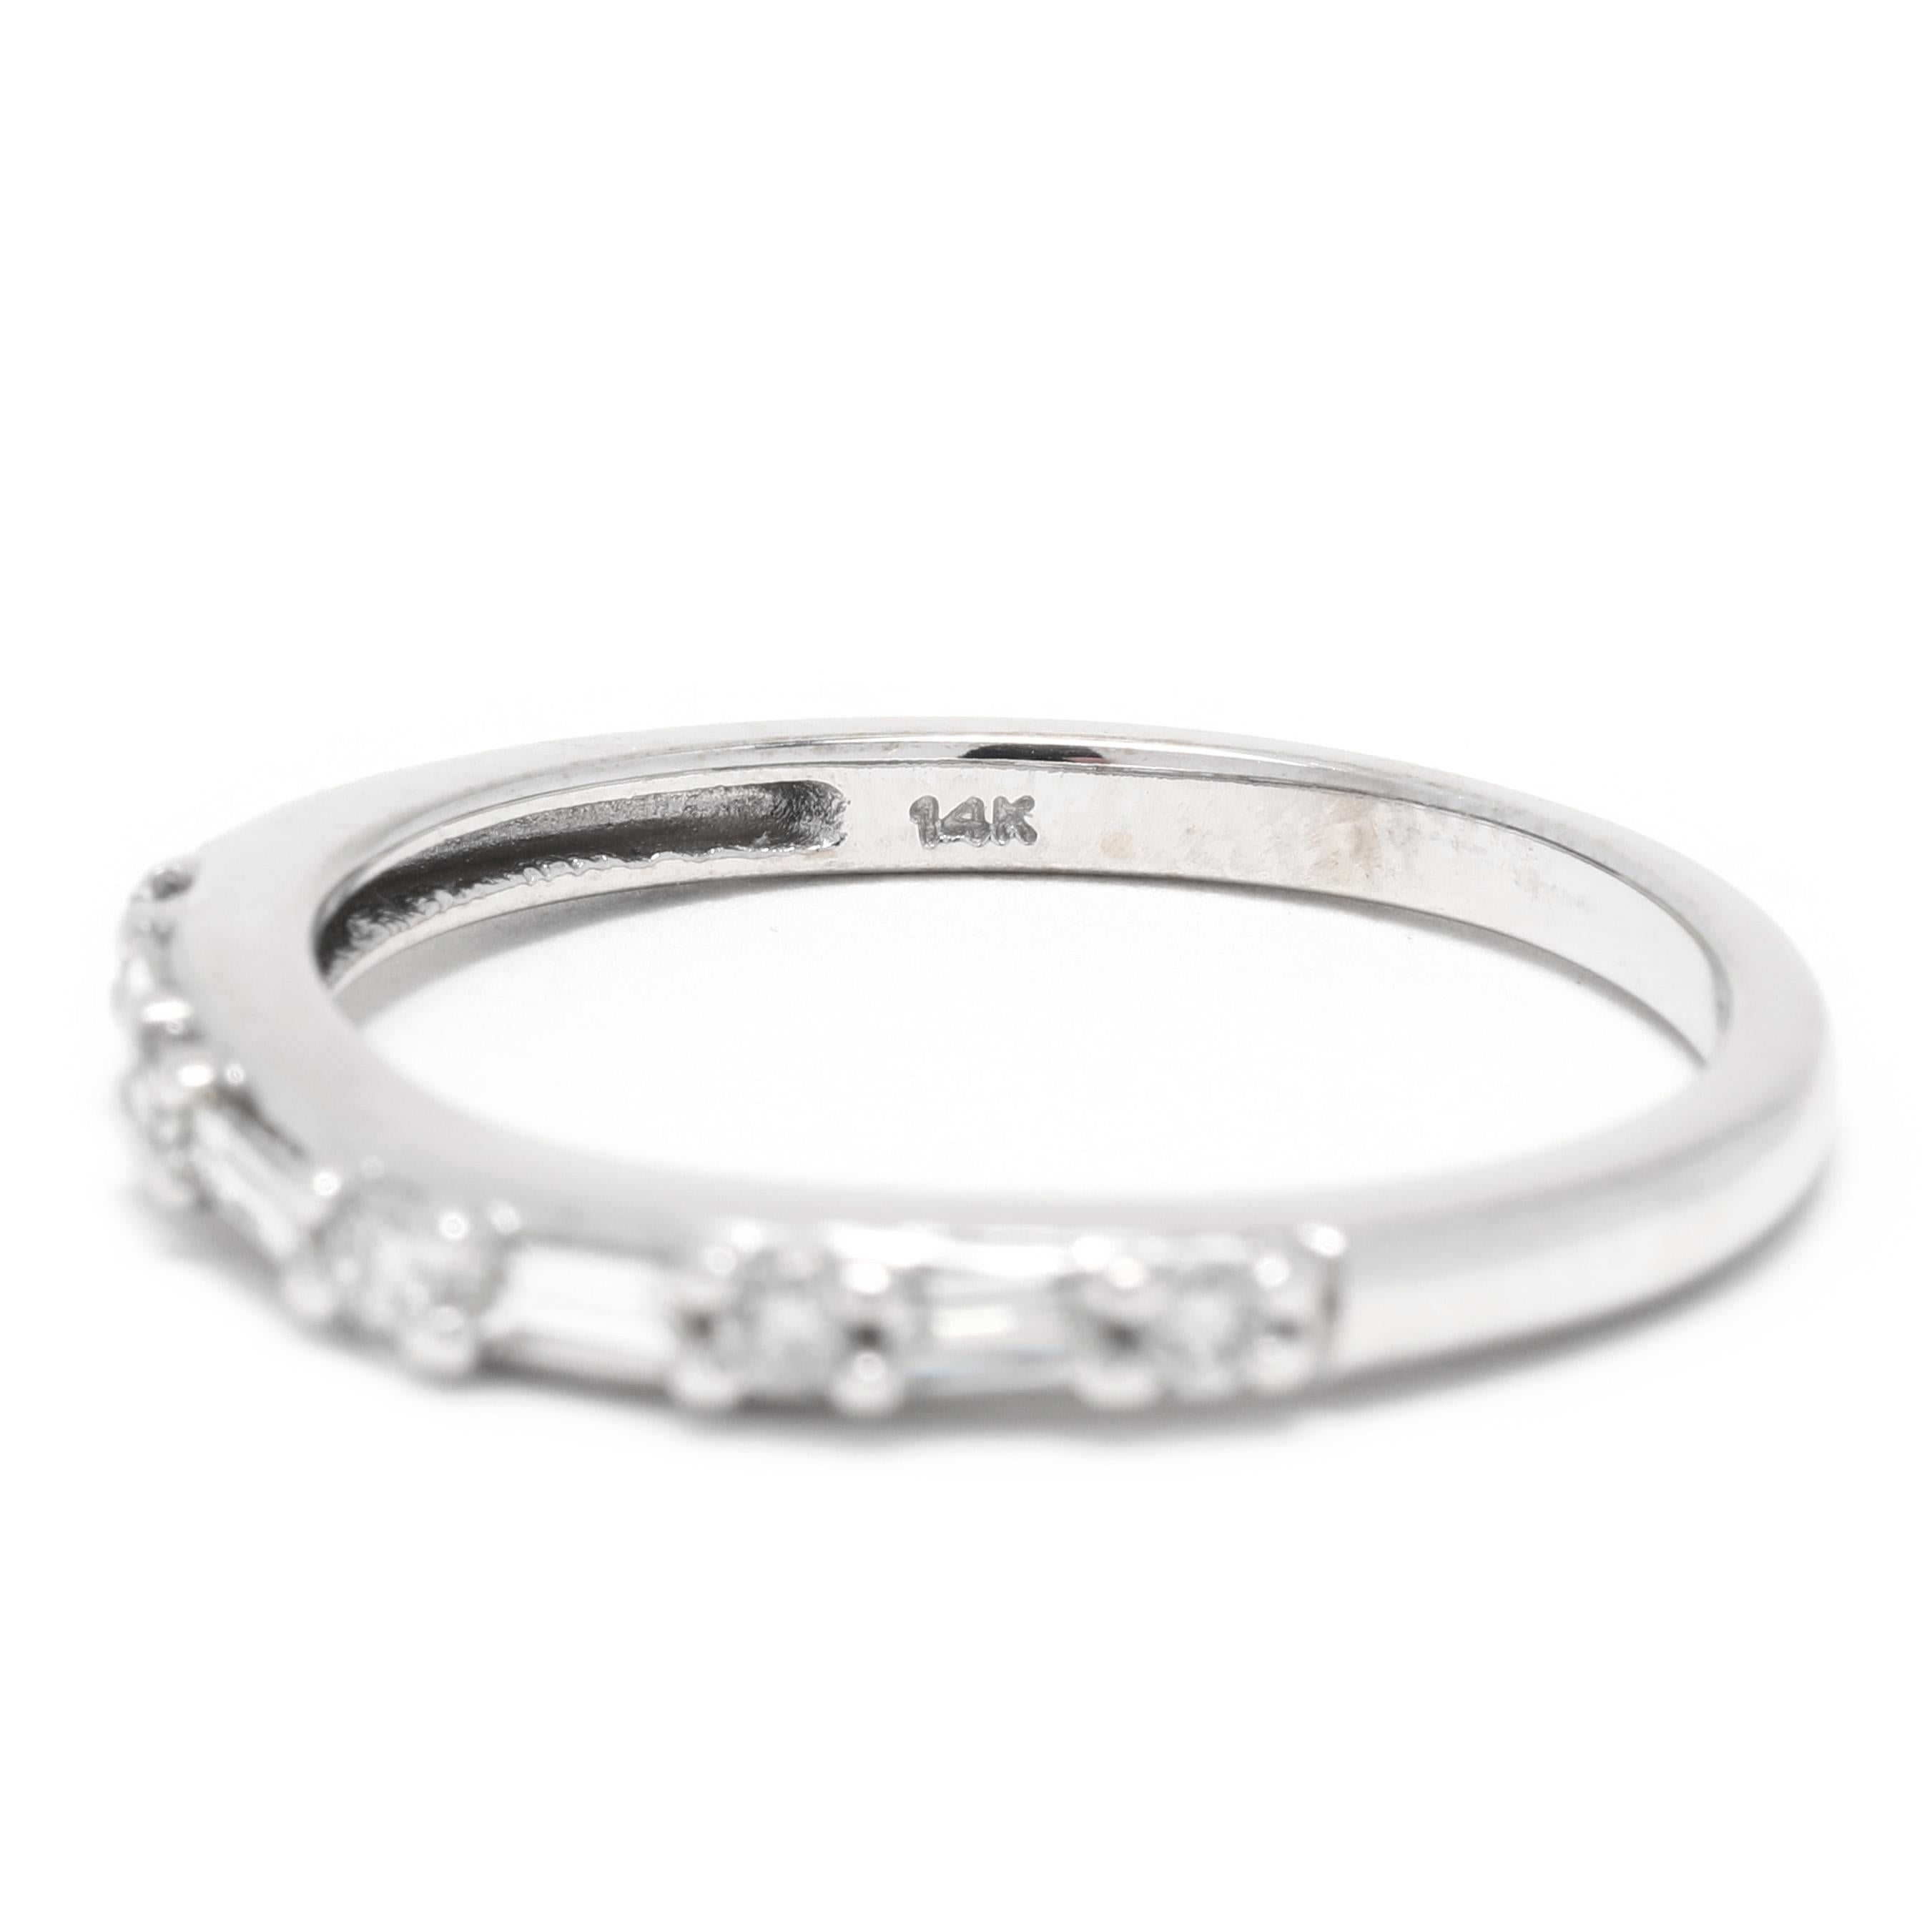 Women's or Men's Round Baguette Curved Diamond Wedding Band, 14K White Gold, Ring Size 7